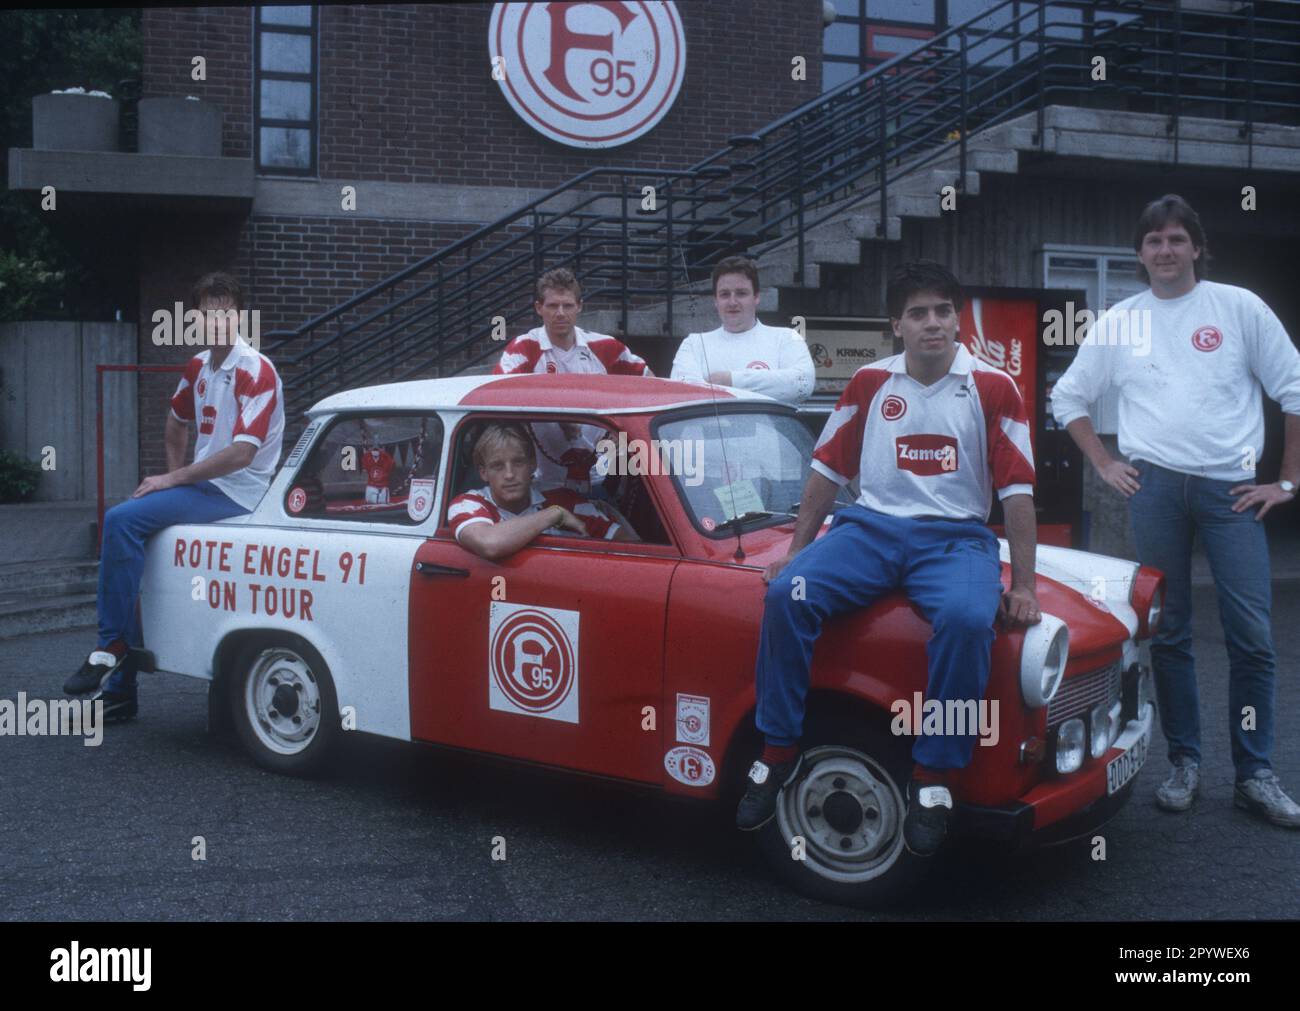 'Fortuna Düsseldorf season 1991/92. Players with a Trabbi of the fan club ''Rote Engel''. From left: Ralf Loose, Mike Büskens (in the car), Sven Demandt (in the back) and Marcello Carracedo (on the hood) together with two members of the fan club (white sweaters). 15.07.1991 (estimated). Only for journalistic use! Only for editorial use! [automated translation]' Stock Photo